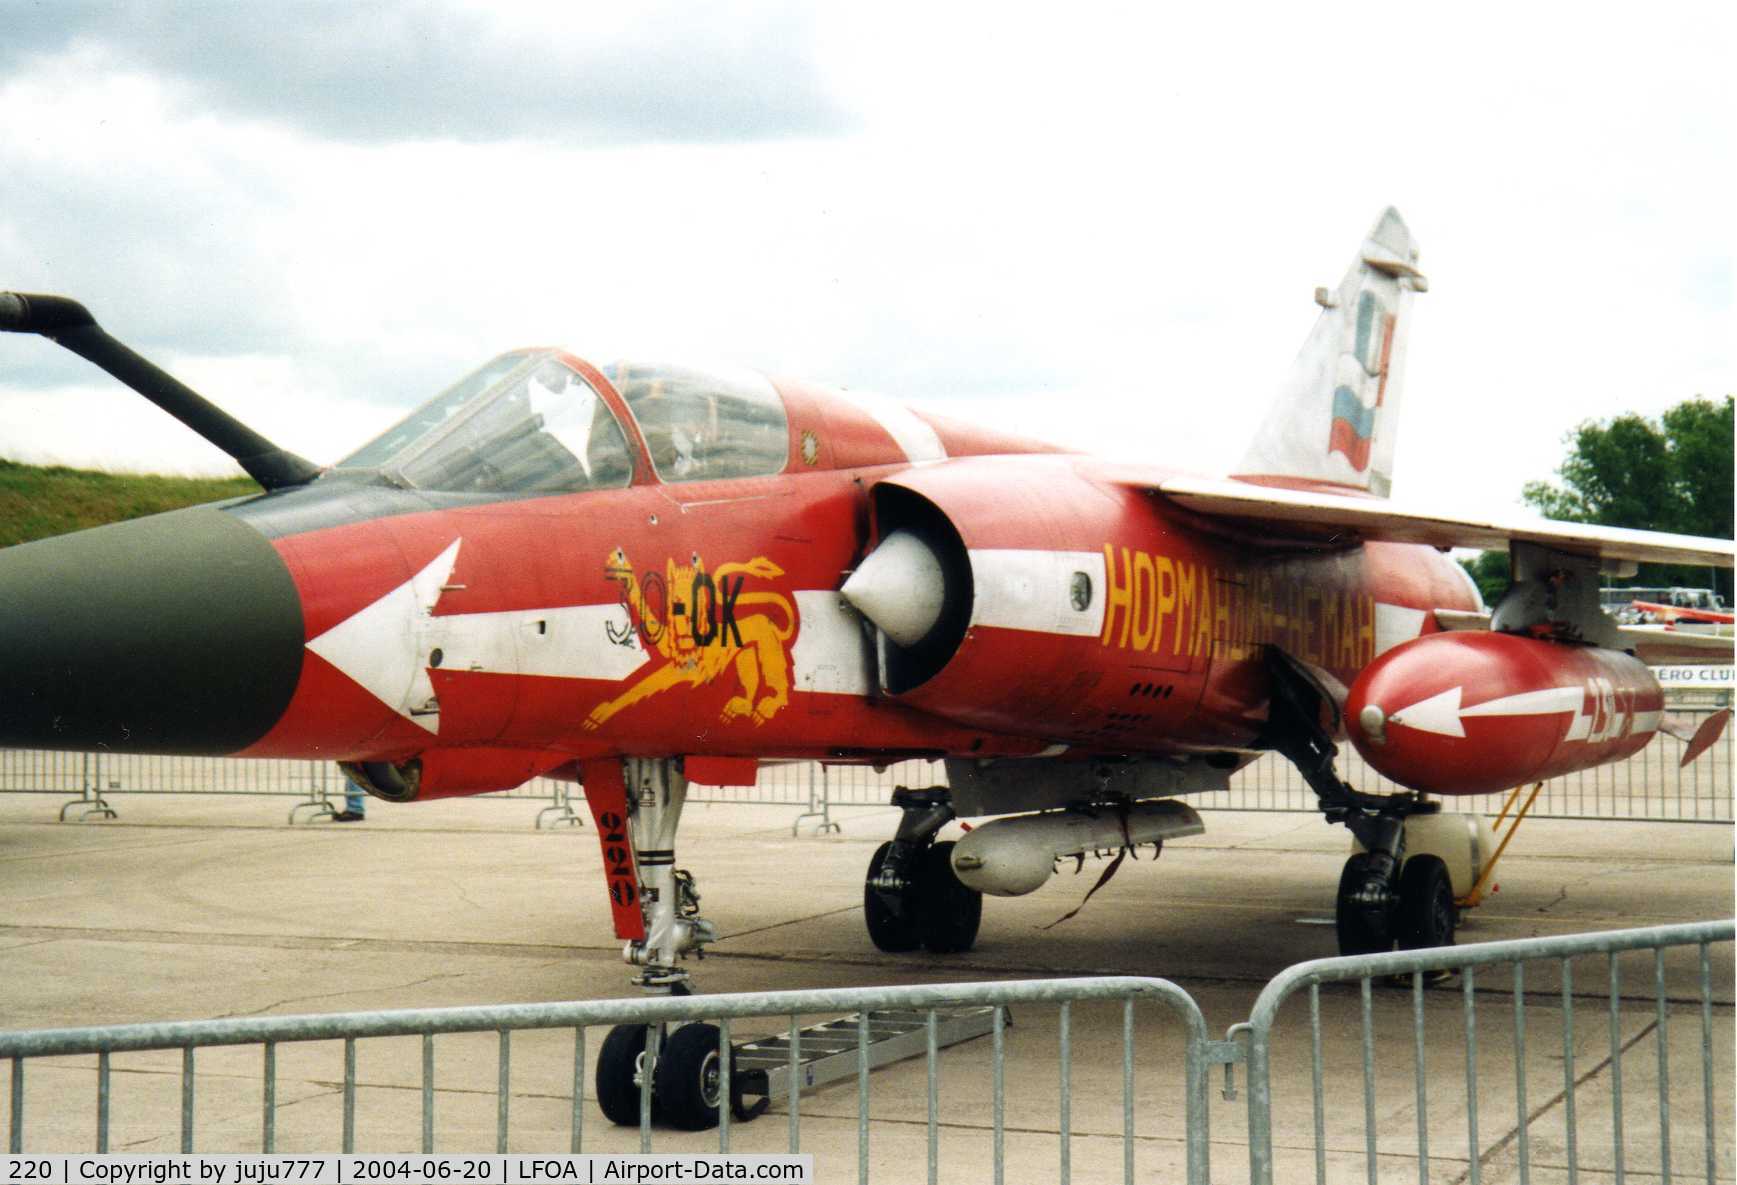 220, Dassault Mirage F.1CT C/N Not found (2), on display at Avord whis spécial paint